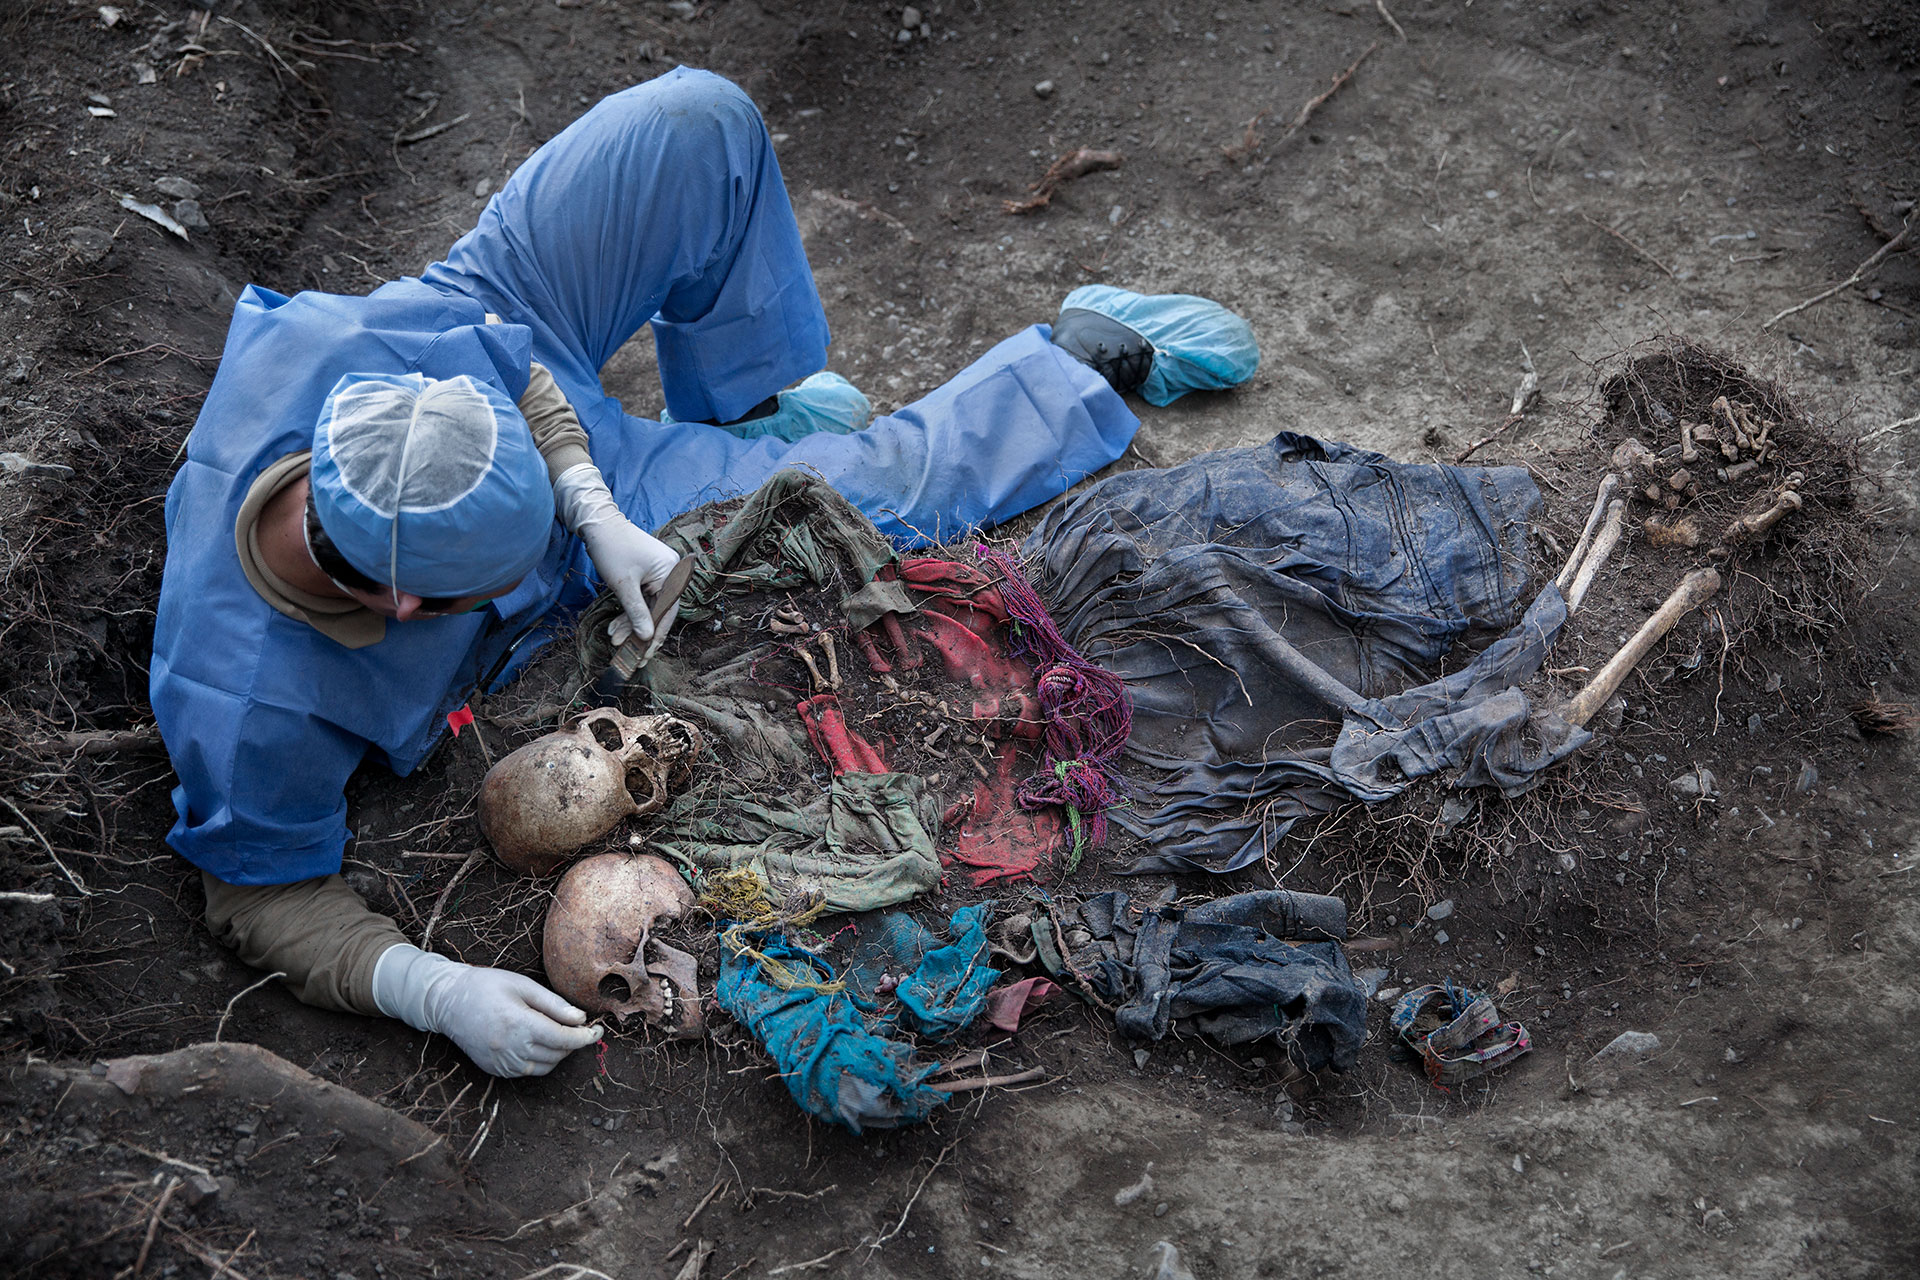 A group of forensic examiners works in what is known as Chaupimayo, an area of matted vegetation in the midst of a mountain 24 hours walking from the nearest road. The forensic archaeologist Dannal Aramburú has spent five hours outlining the crime scene with his knife, brush, and trowel. It is quite difficult to remove the earth from the bones of what appears to be a woman and her child. The trees have been feeding on them for 29 years.